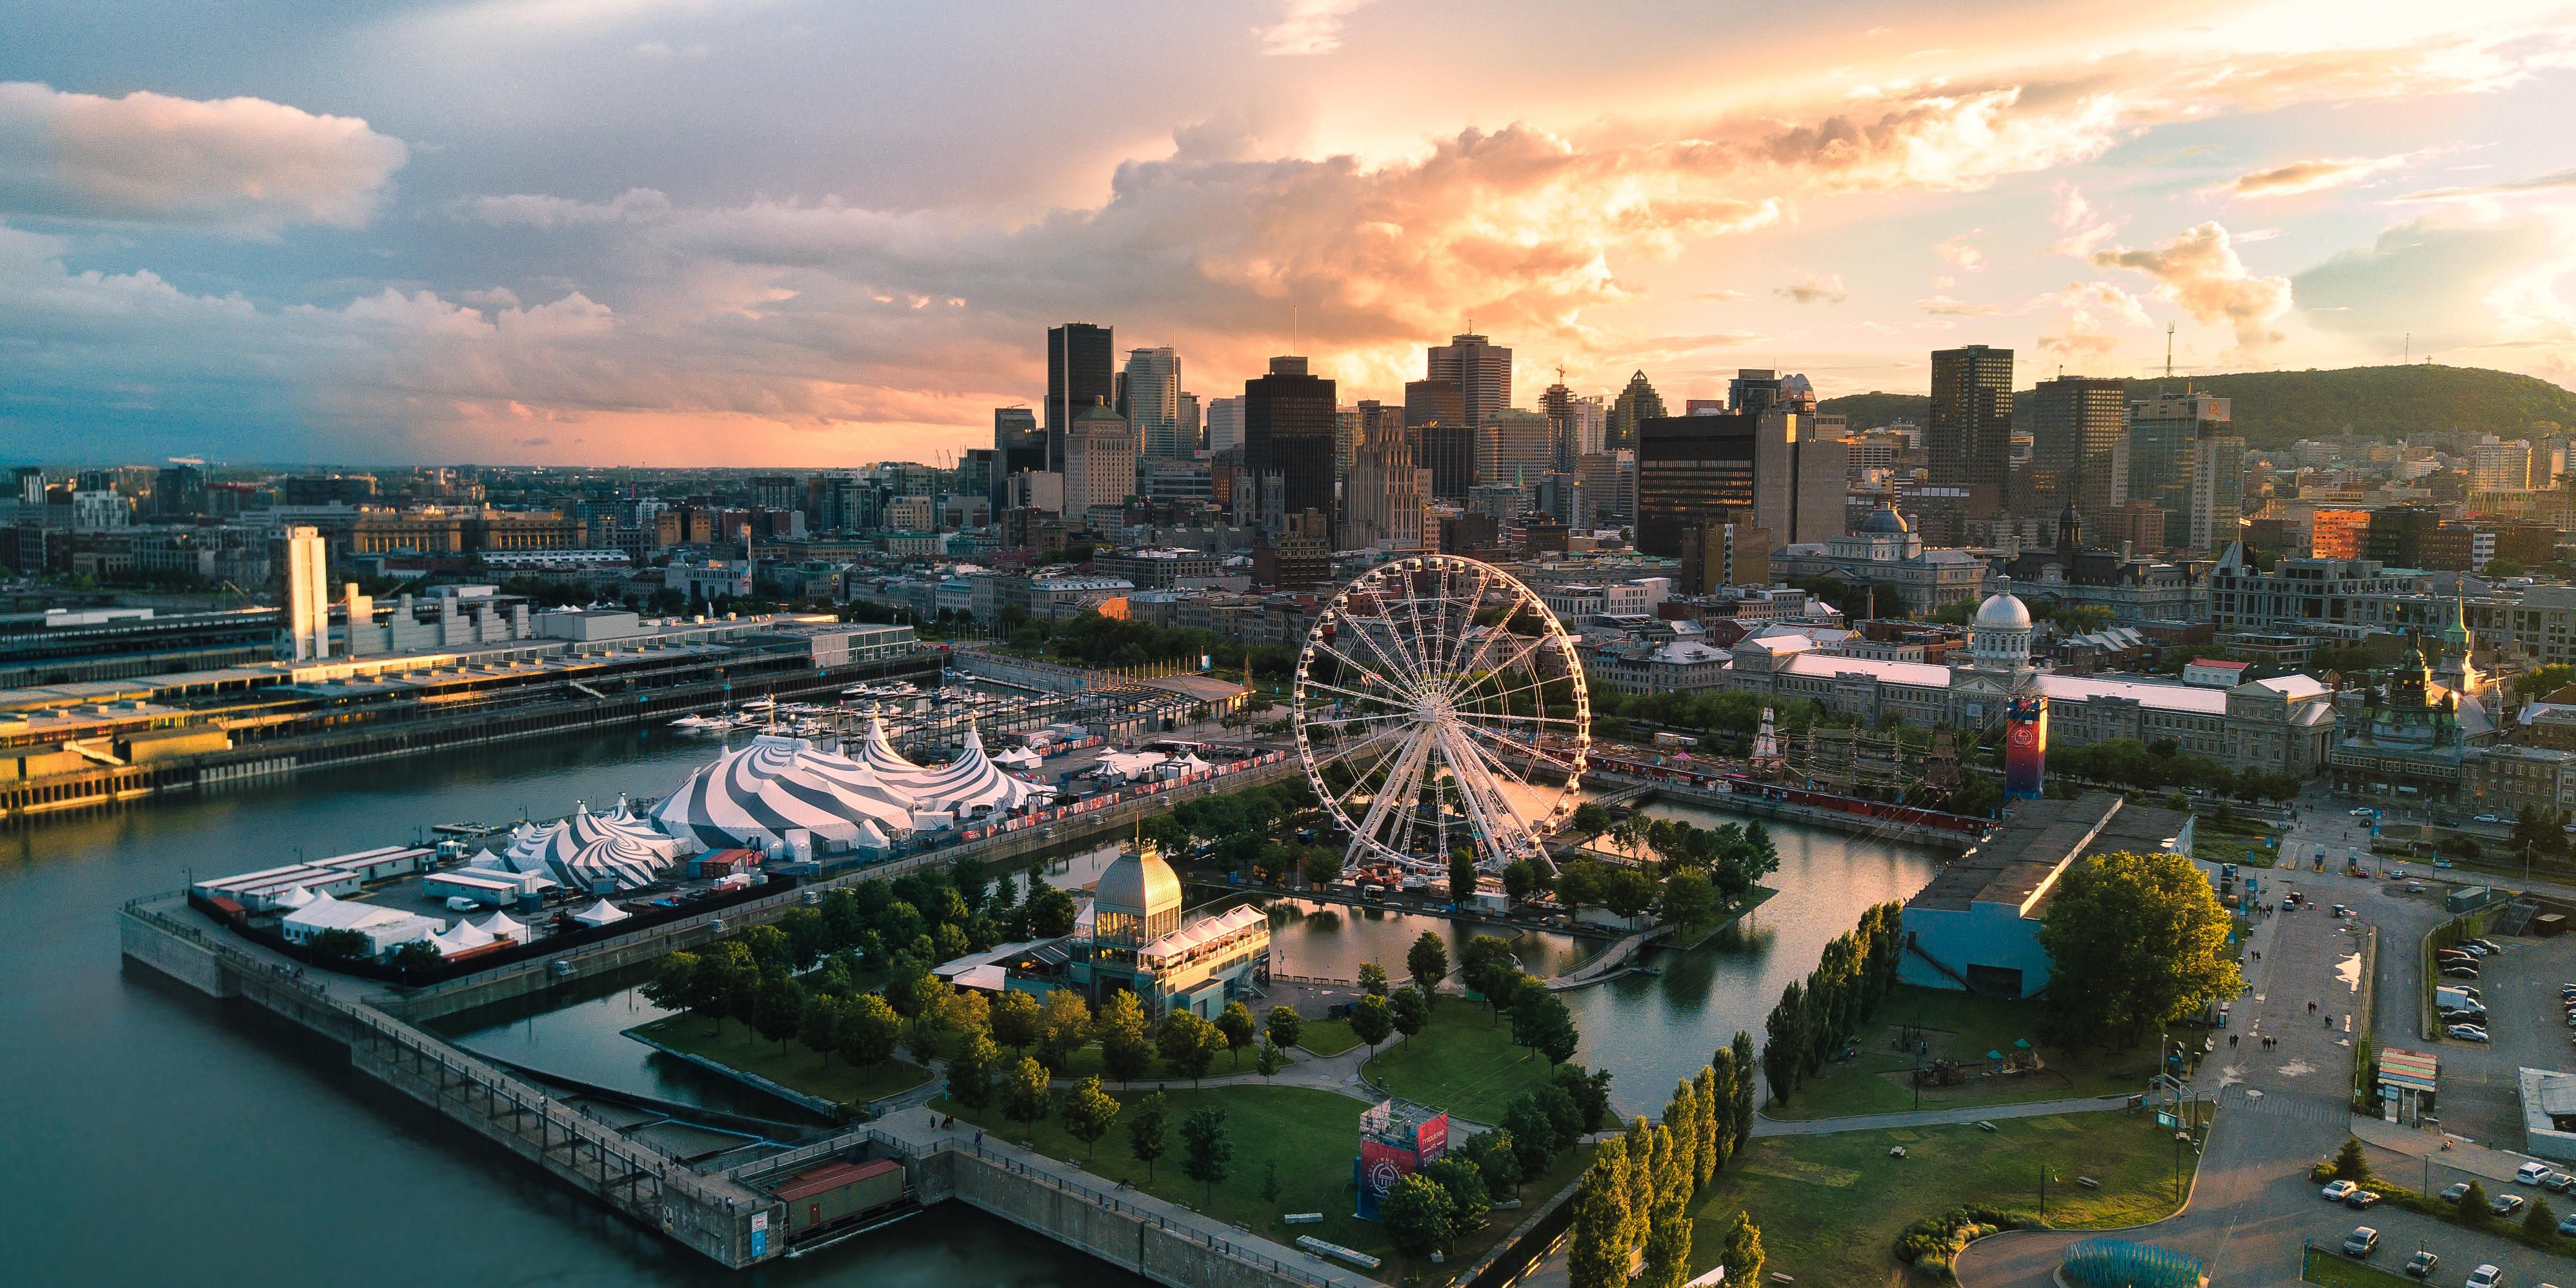 We have created a list of our favorite attractions to visit in Montreal!